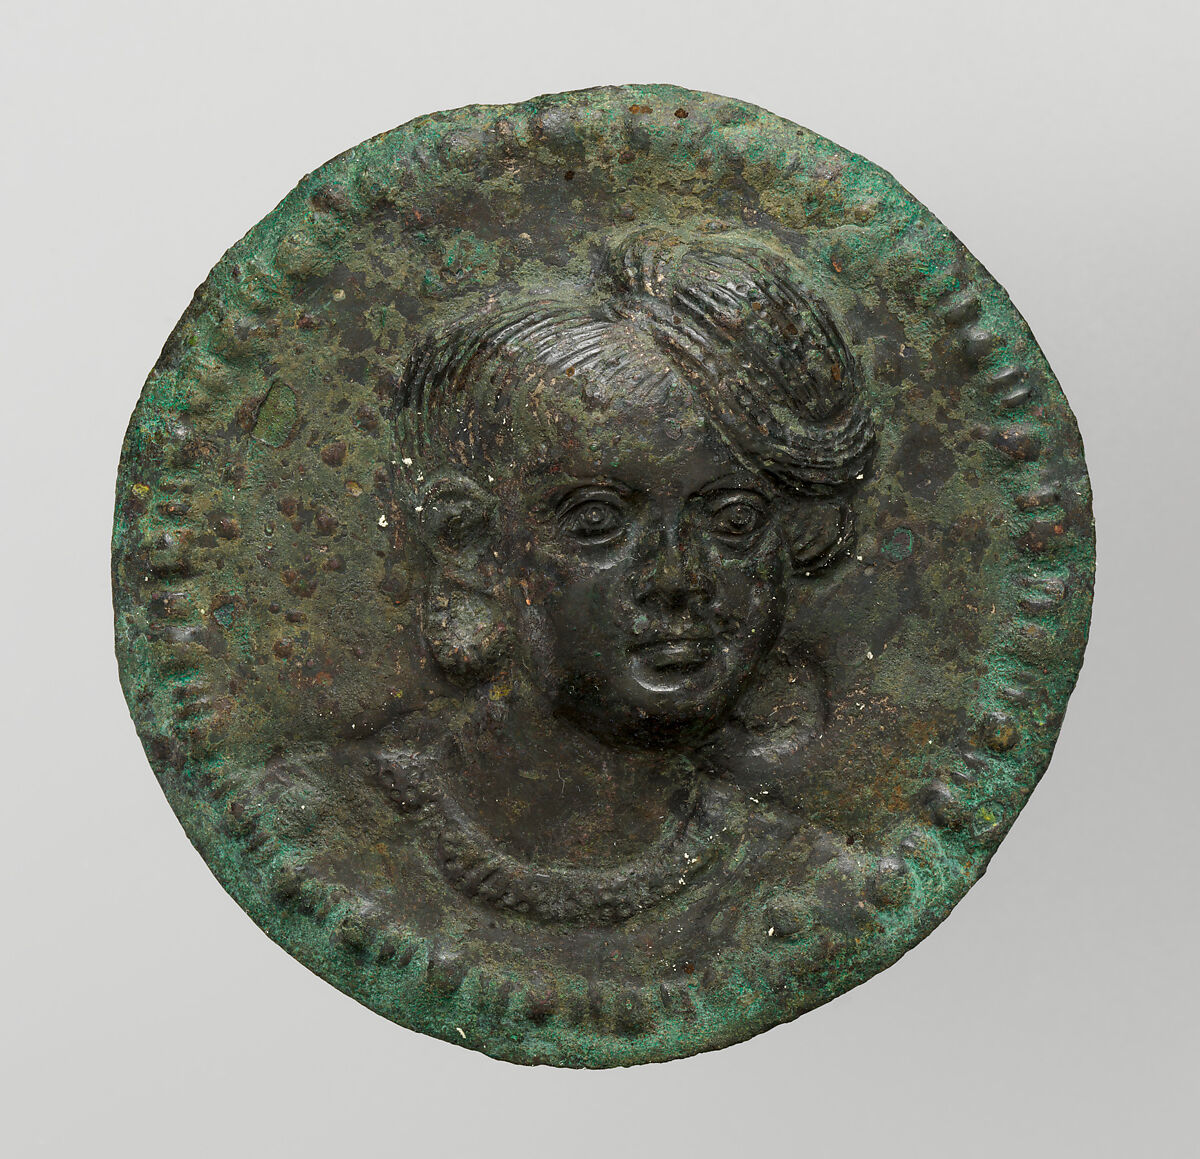 One of a pair of medallions with portrait busts, Copper-nickel alloy, India, probably Maharashtra 